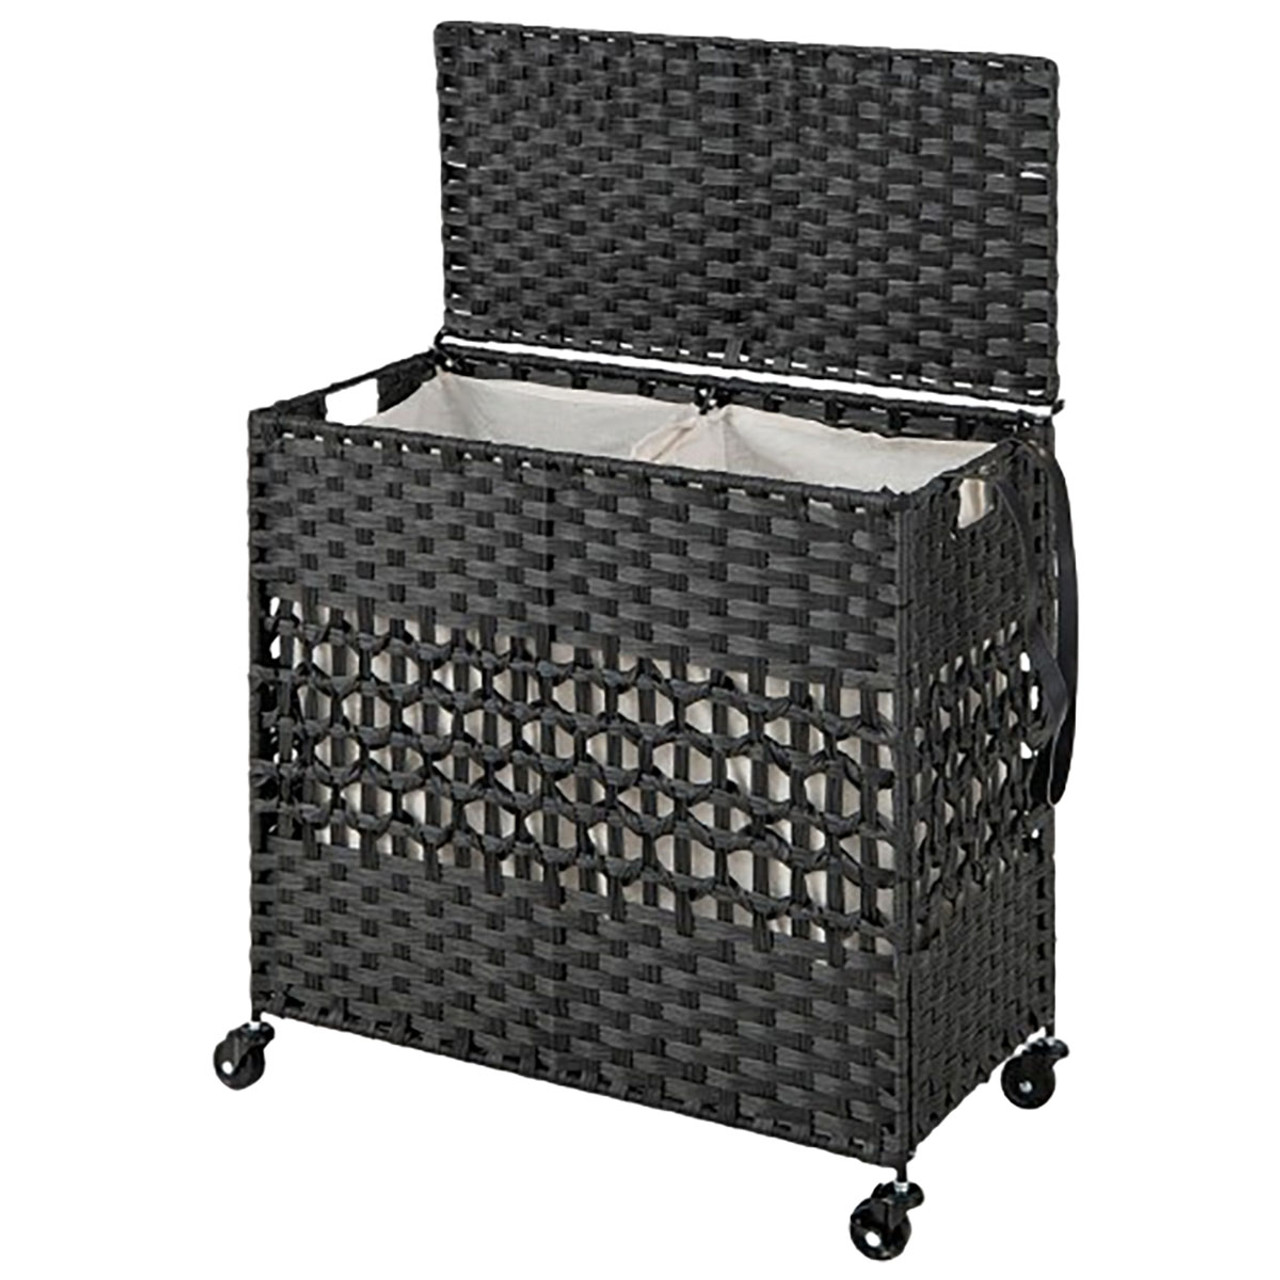 110L 2-Section Laundry Hamper with 2 Removable & Washable Liner Bags product image